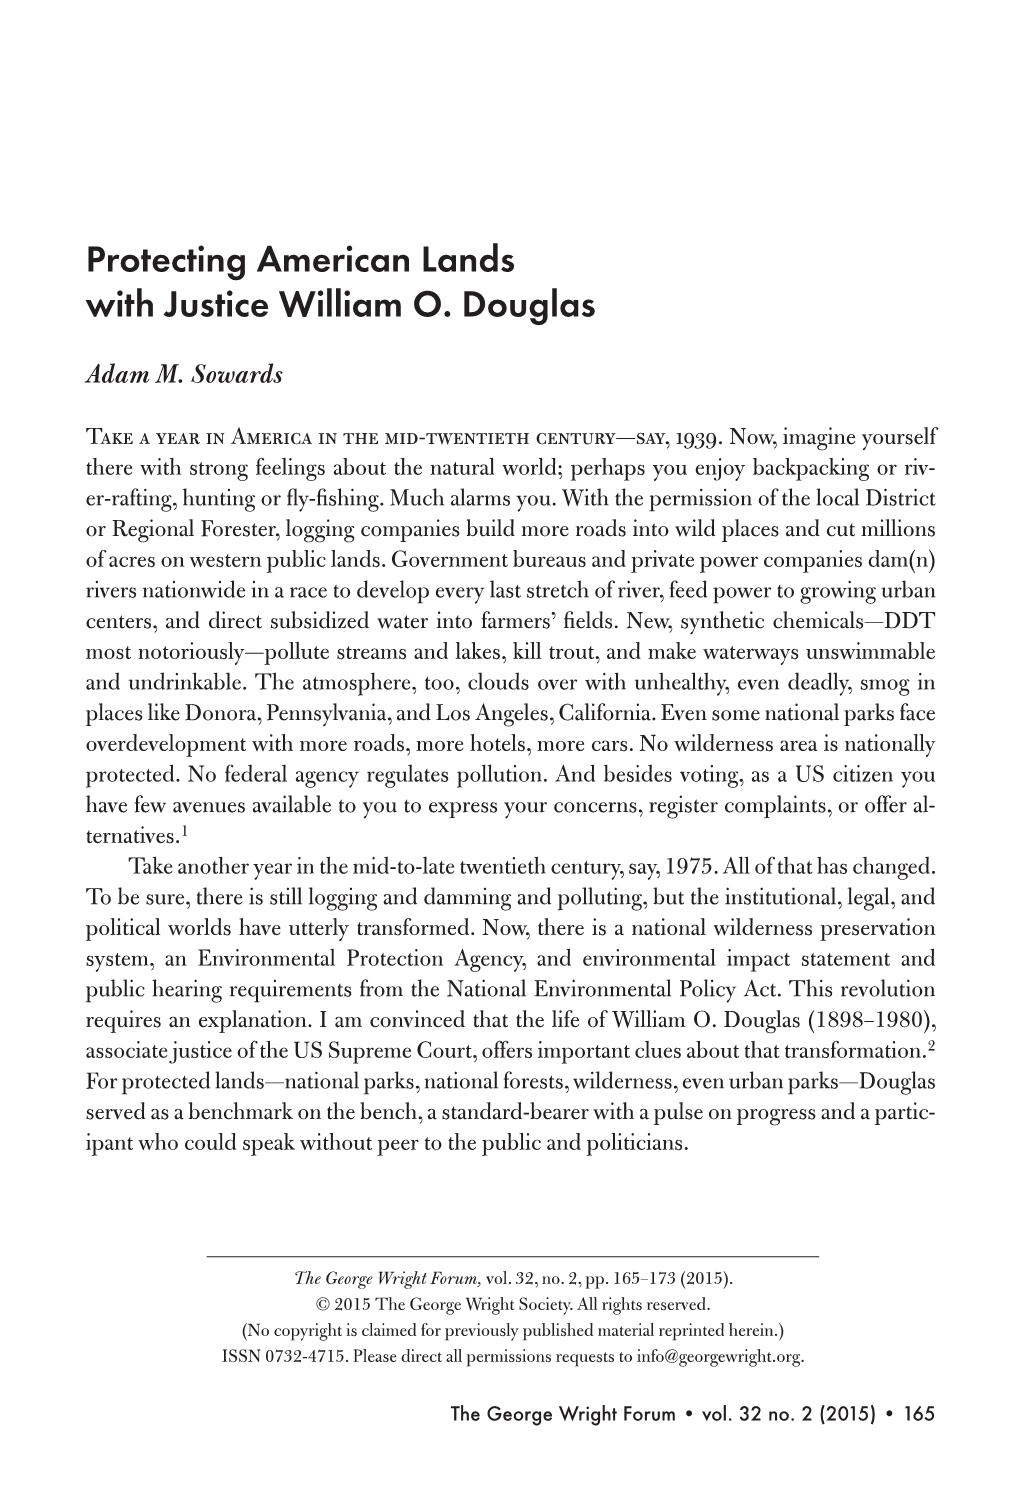 Protecting American Lands with Justice William O. Douglas